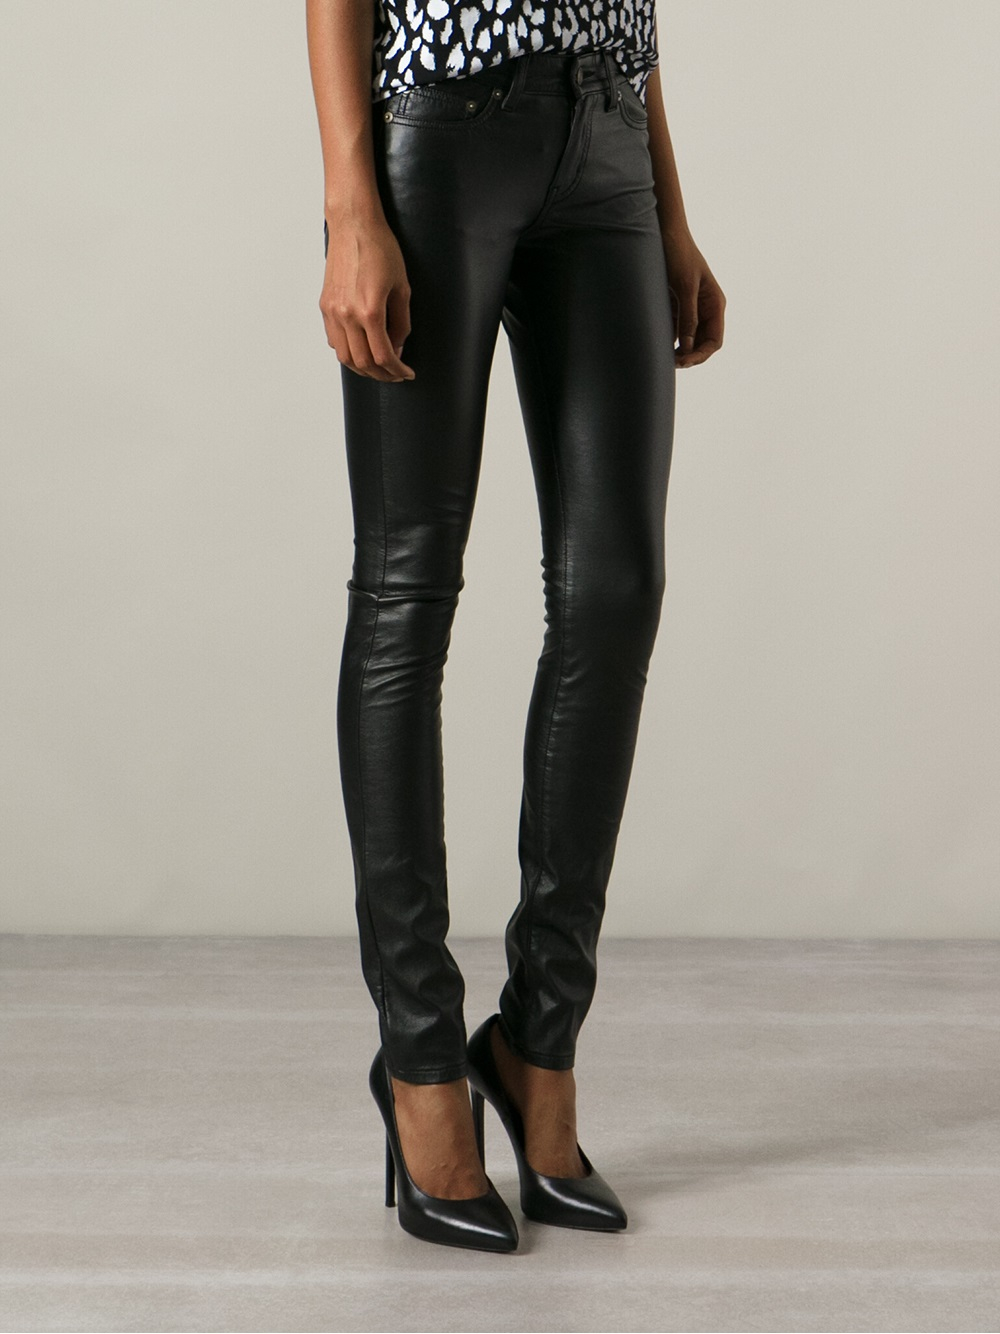 Saint Laurent Eco Leather Skinny Jeans in Black - Lyst